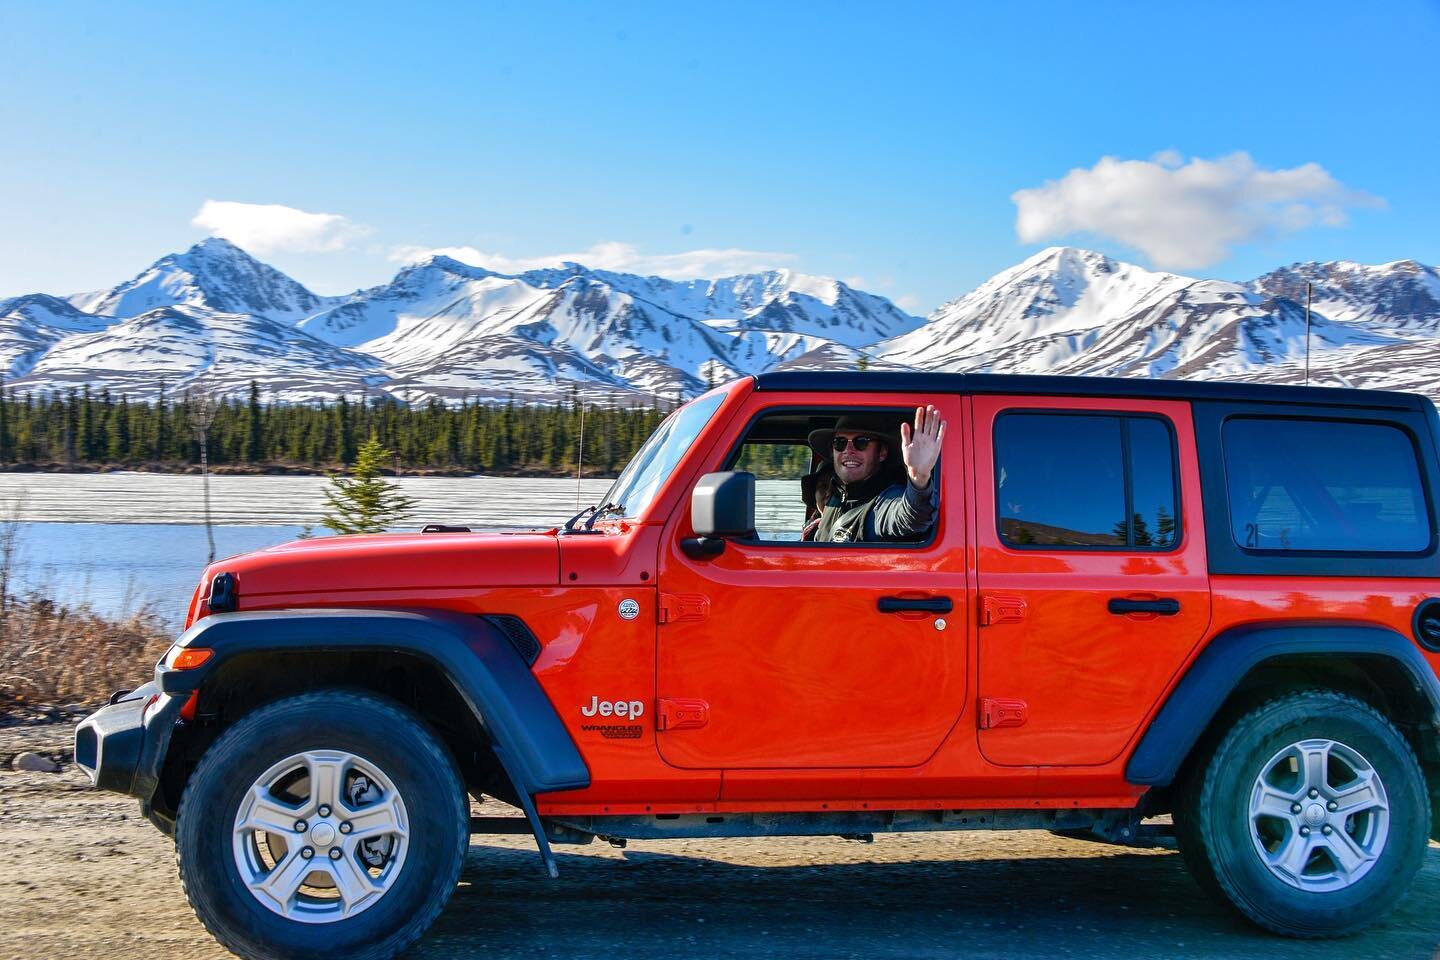 Want to rent a Jeep and go exploring on your own? You&rsquo;re in luck! Check out our UGuide Jeep rentals!